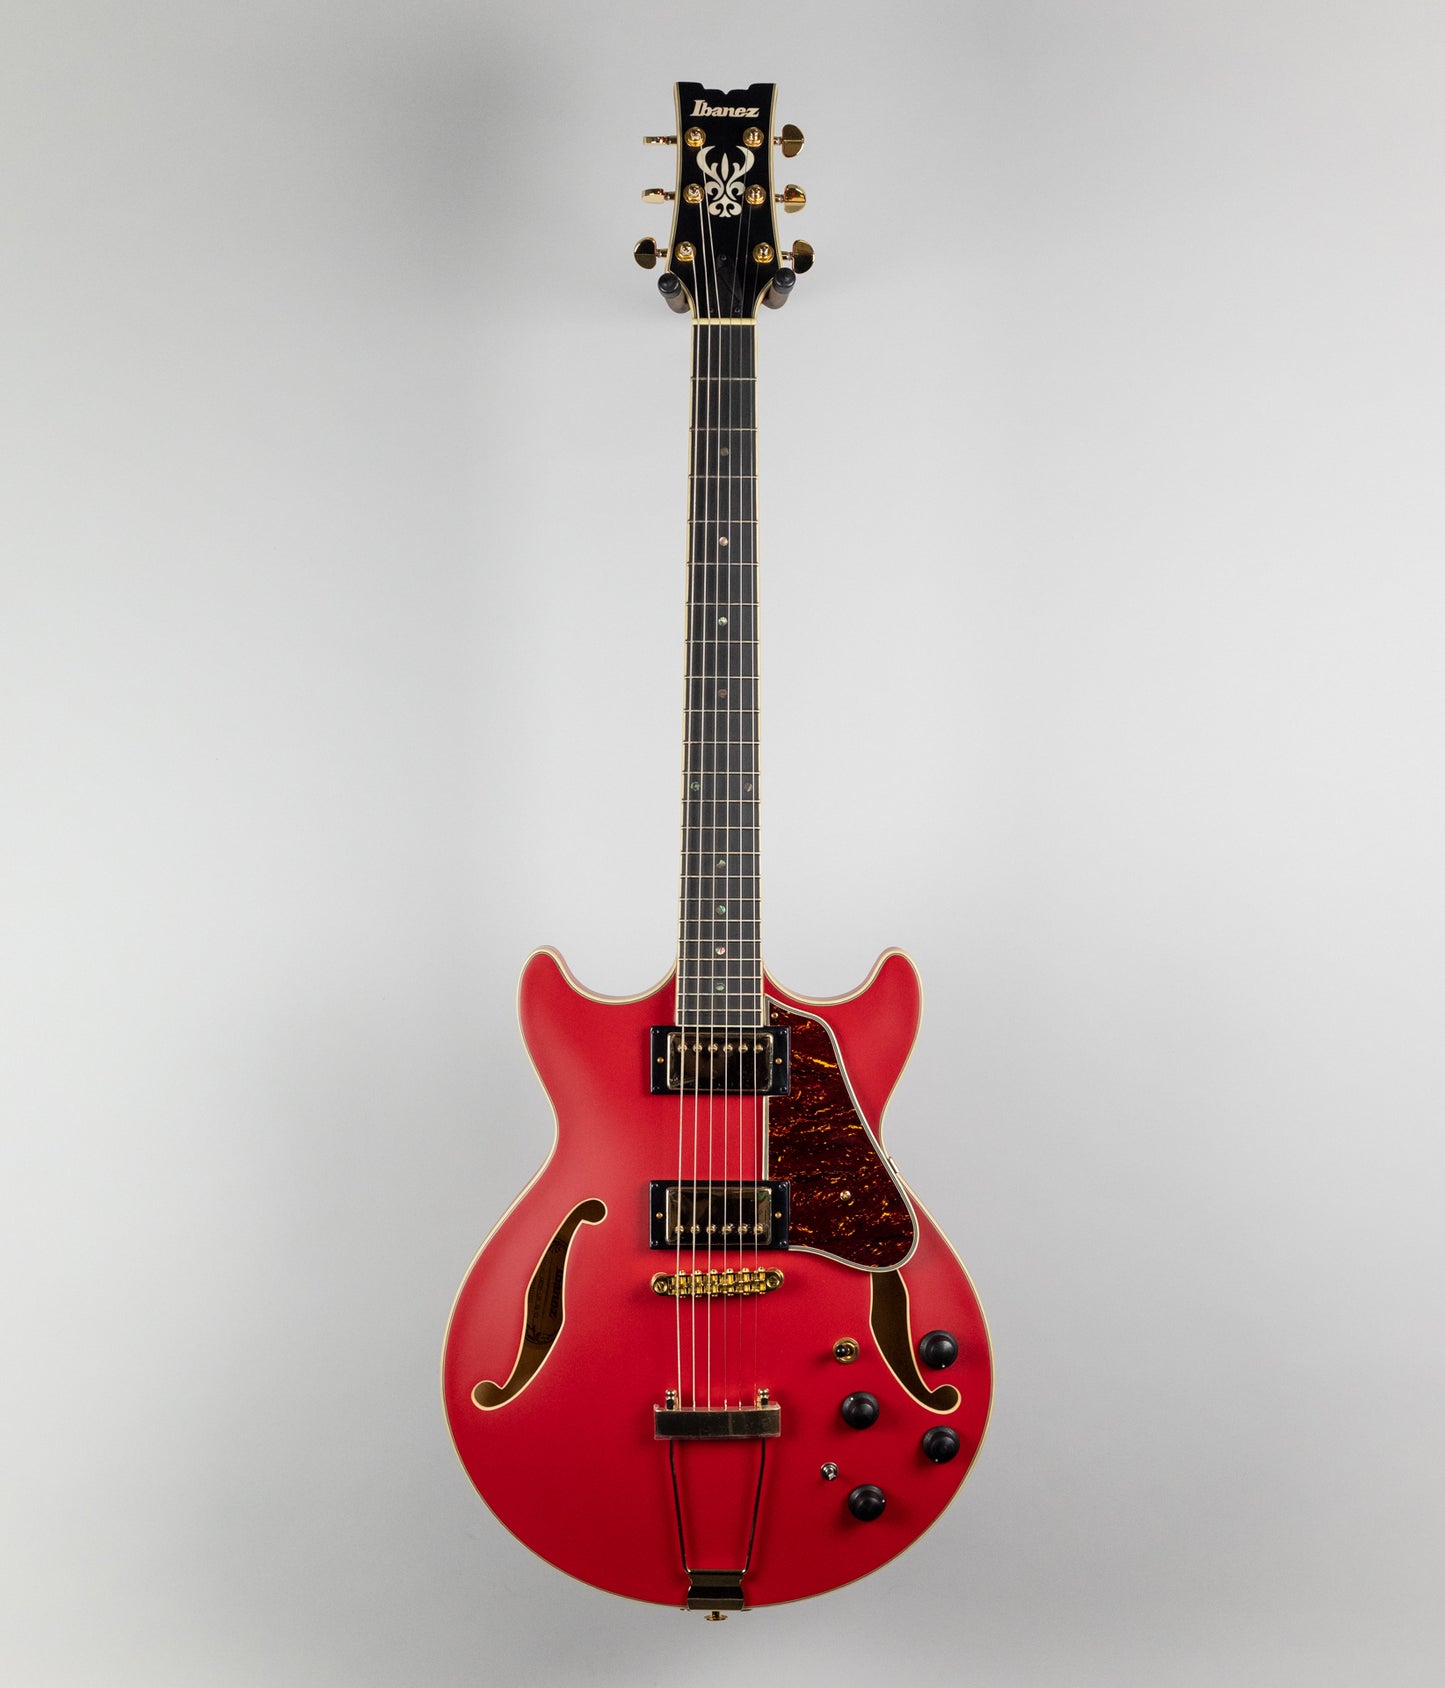 Ibanez AMH90-CRF Semi-Hollow Body Guitar in Cherry Red Flat